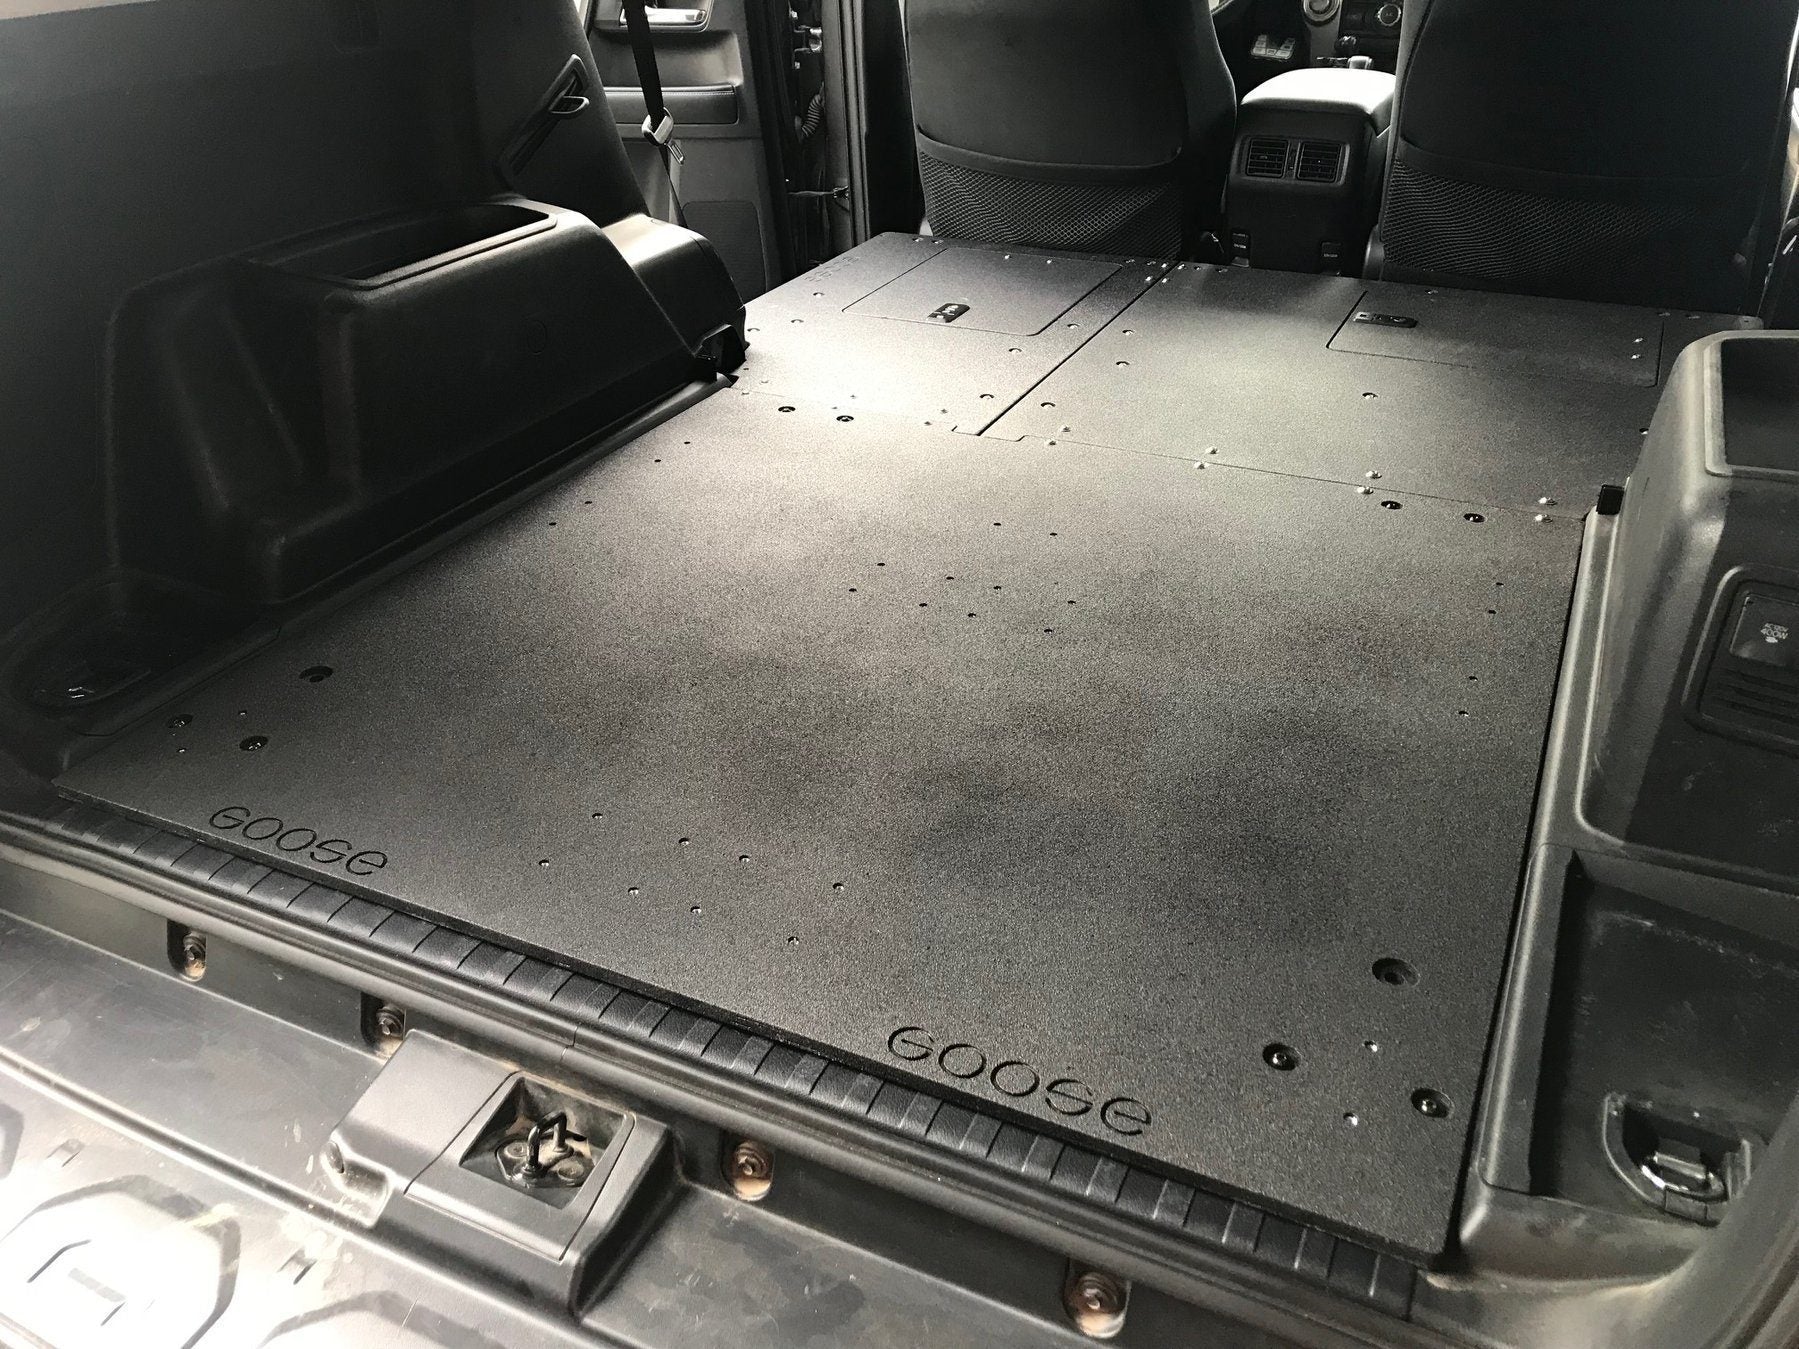 '10-23 (5th Gen) Toyota 4Runner Low Profile Plate Based Sleeping Platforms Interior Accessoires Goose Gear display